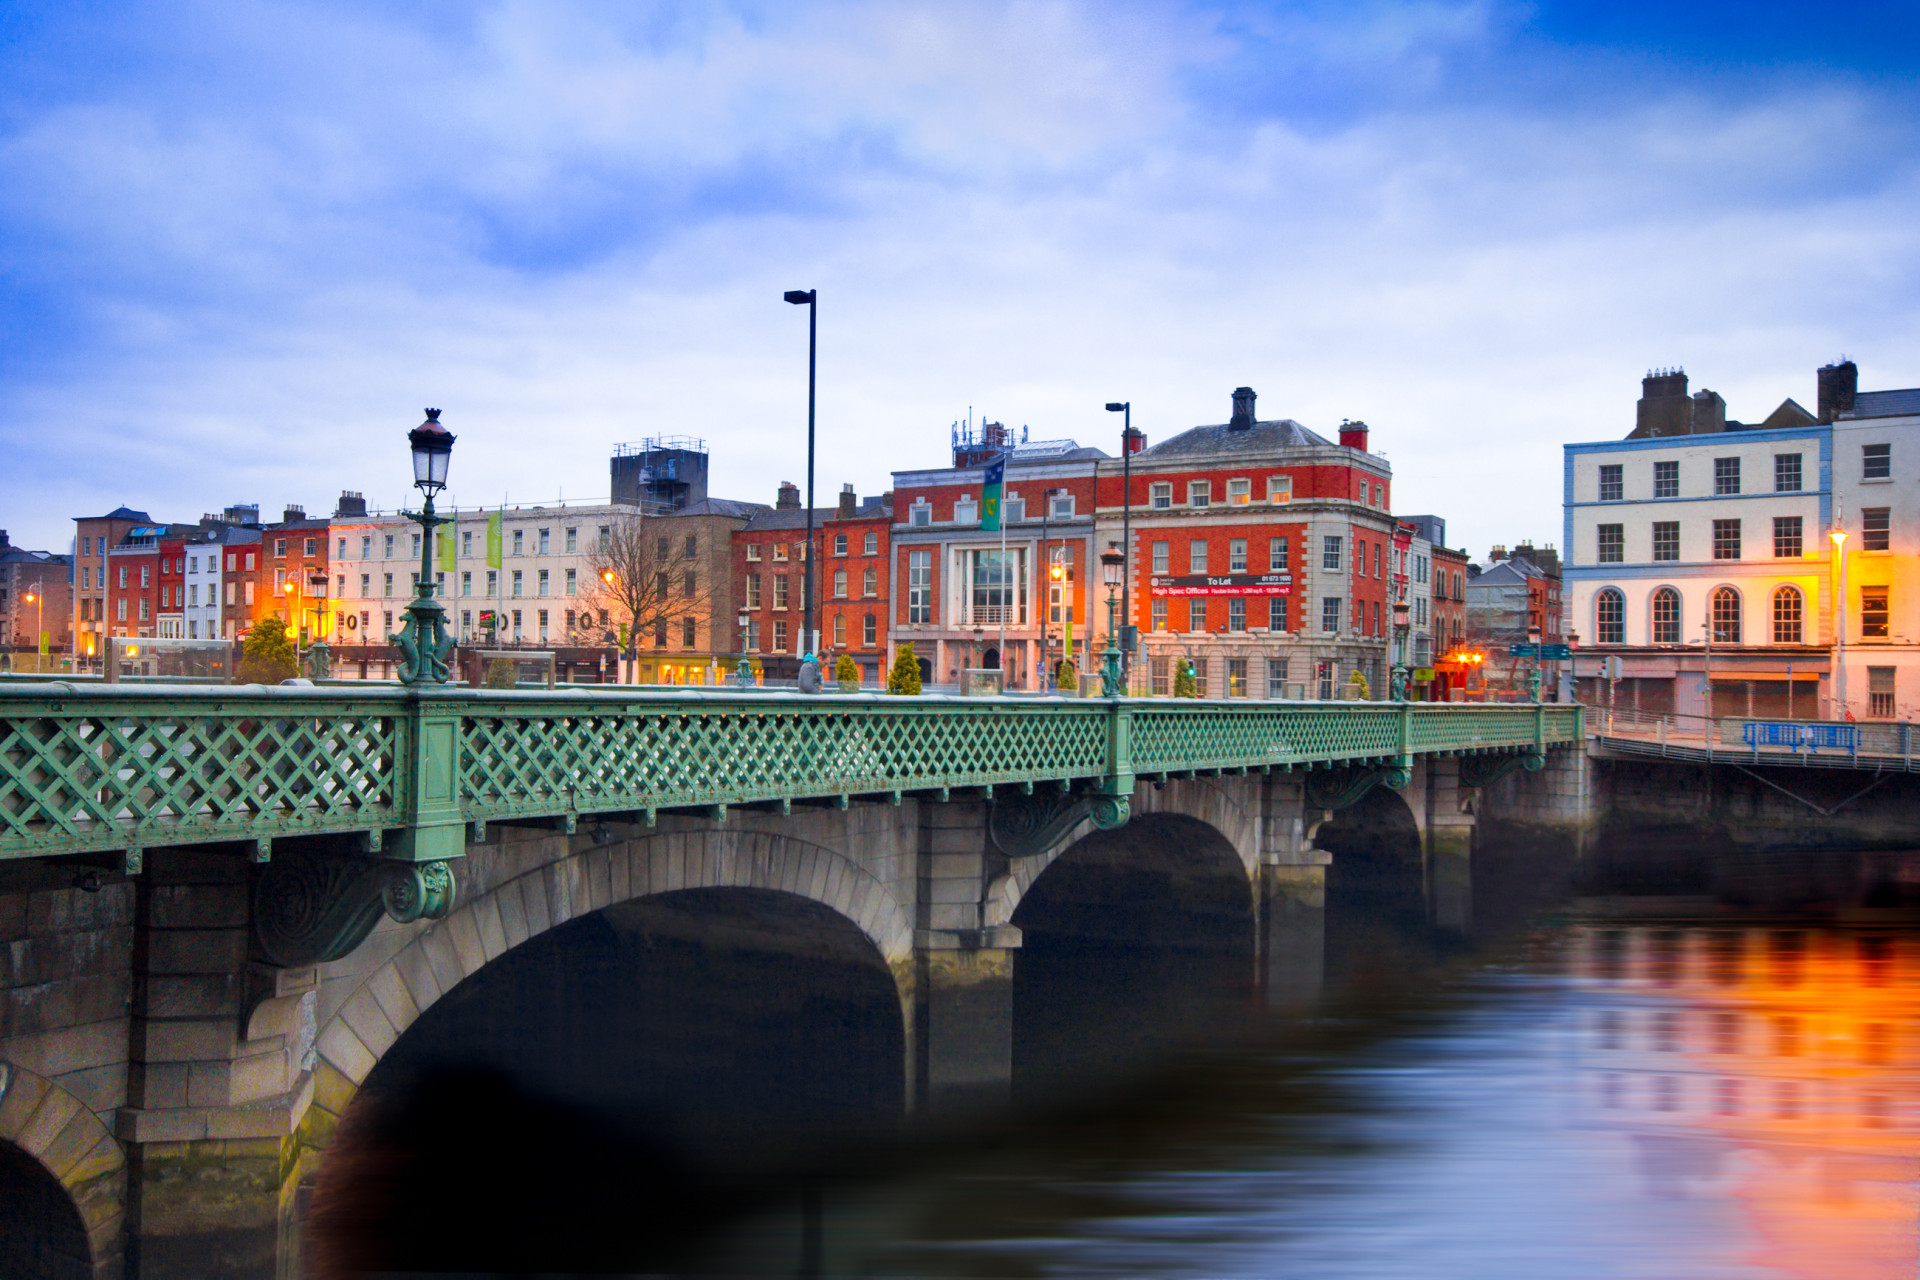 In Ireland, the city of Dublin is well adapted to those with mobility restrictions.<p><a href="https://www.msn.com/en-us/community/channel/vid-7xx8mnucu55yw63we9va2gwr7uihbxwc68fxqp25x6tg4ftibpra?cvid=94631541bc0f4f89bfd59158d696ad7e">Follow us and access great exclusive content every day</a></p>